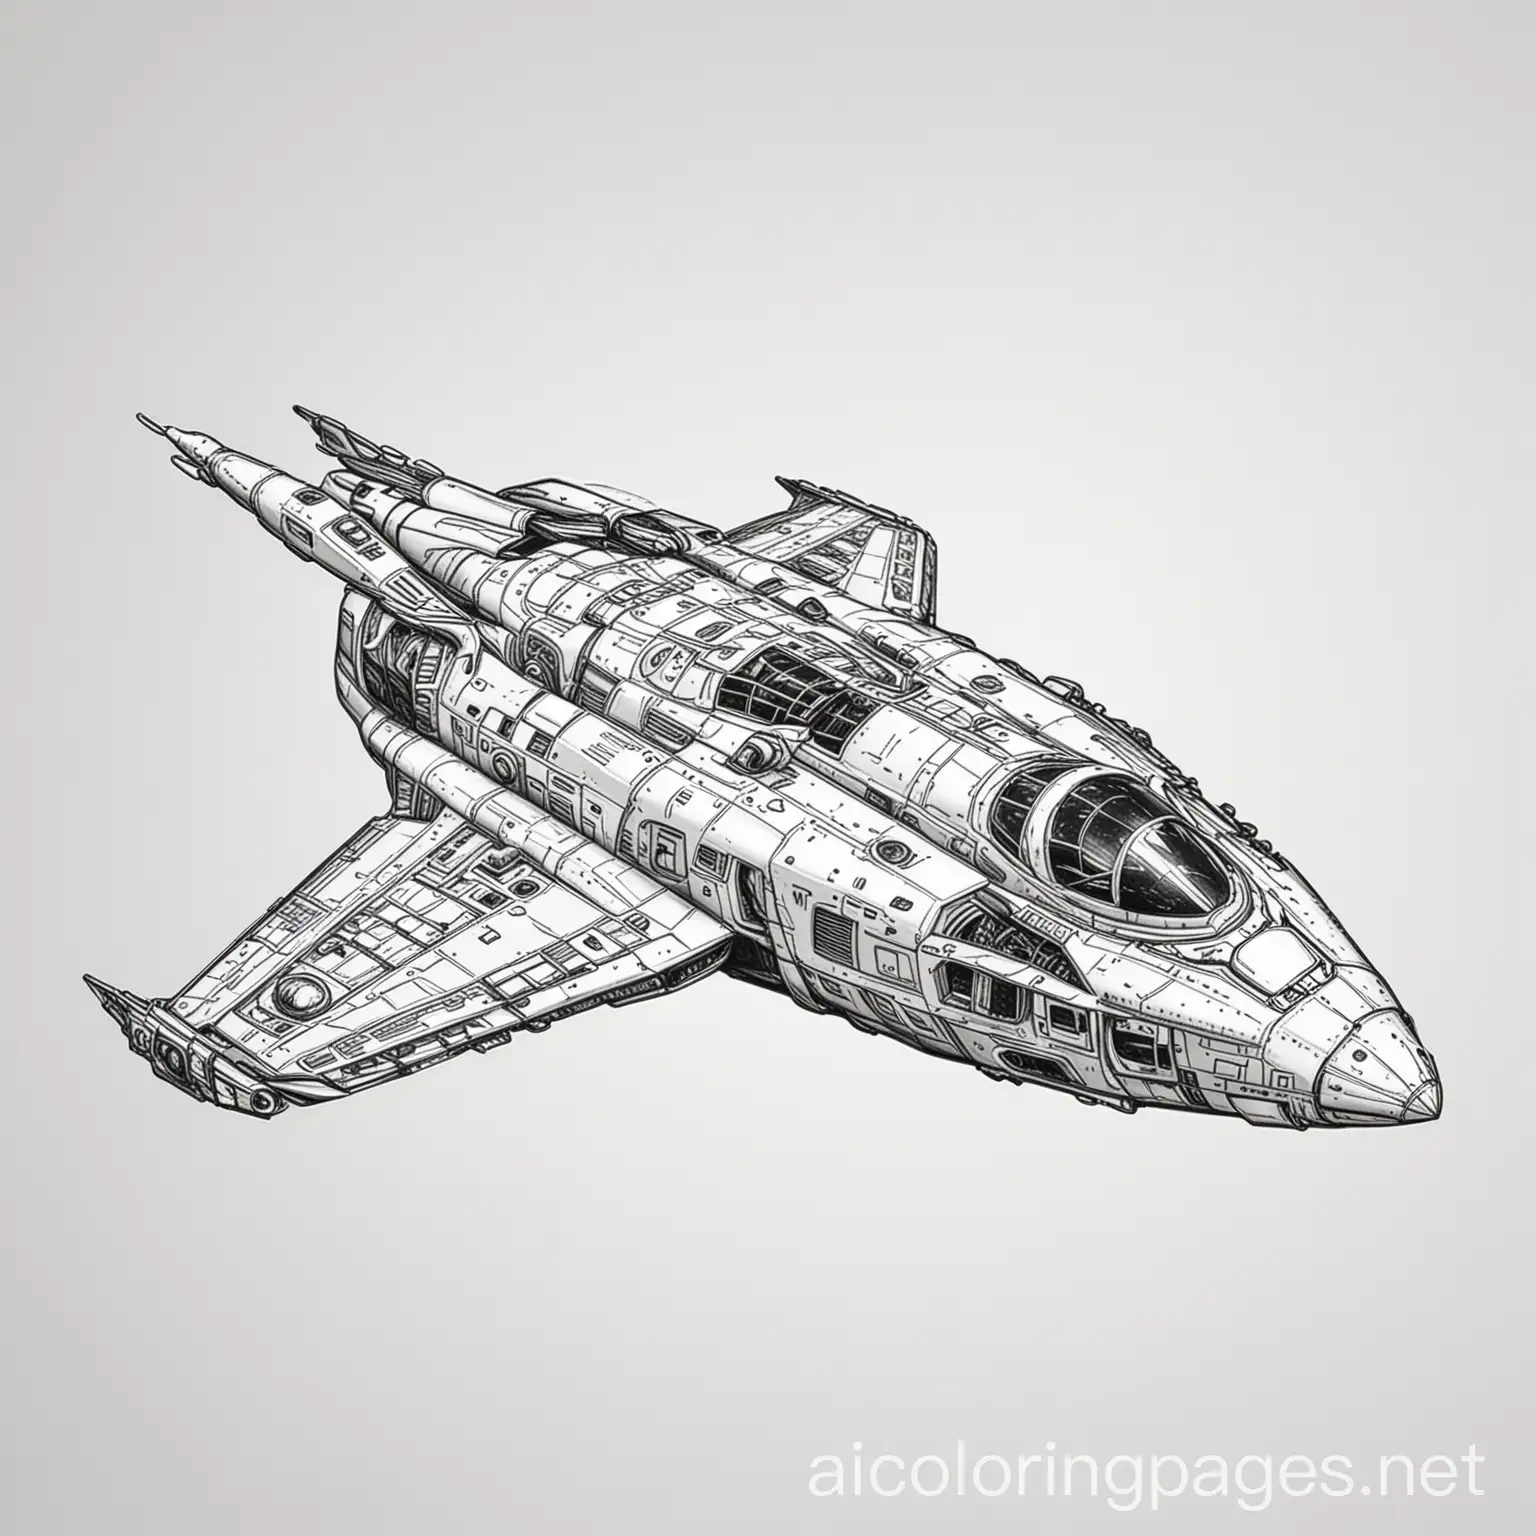 spaceship, Coloring Page, black and white, line art, white background, Simplicity, Ample White Space. The background of the coloring page is plain white to make it easy for young children to color within the lines. The outlines of all the subjects are easy to distinguish, making it simple for kids to color without too much difficulty